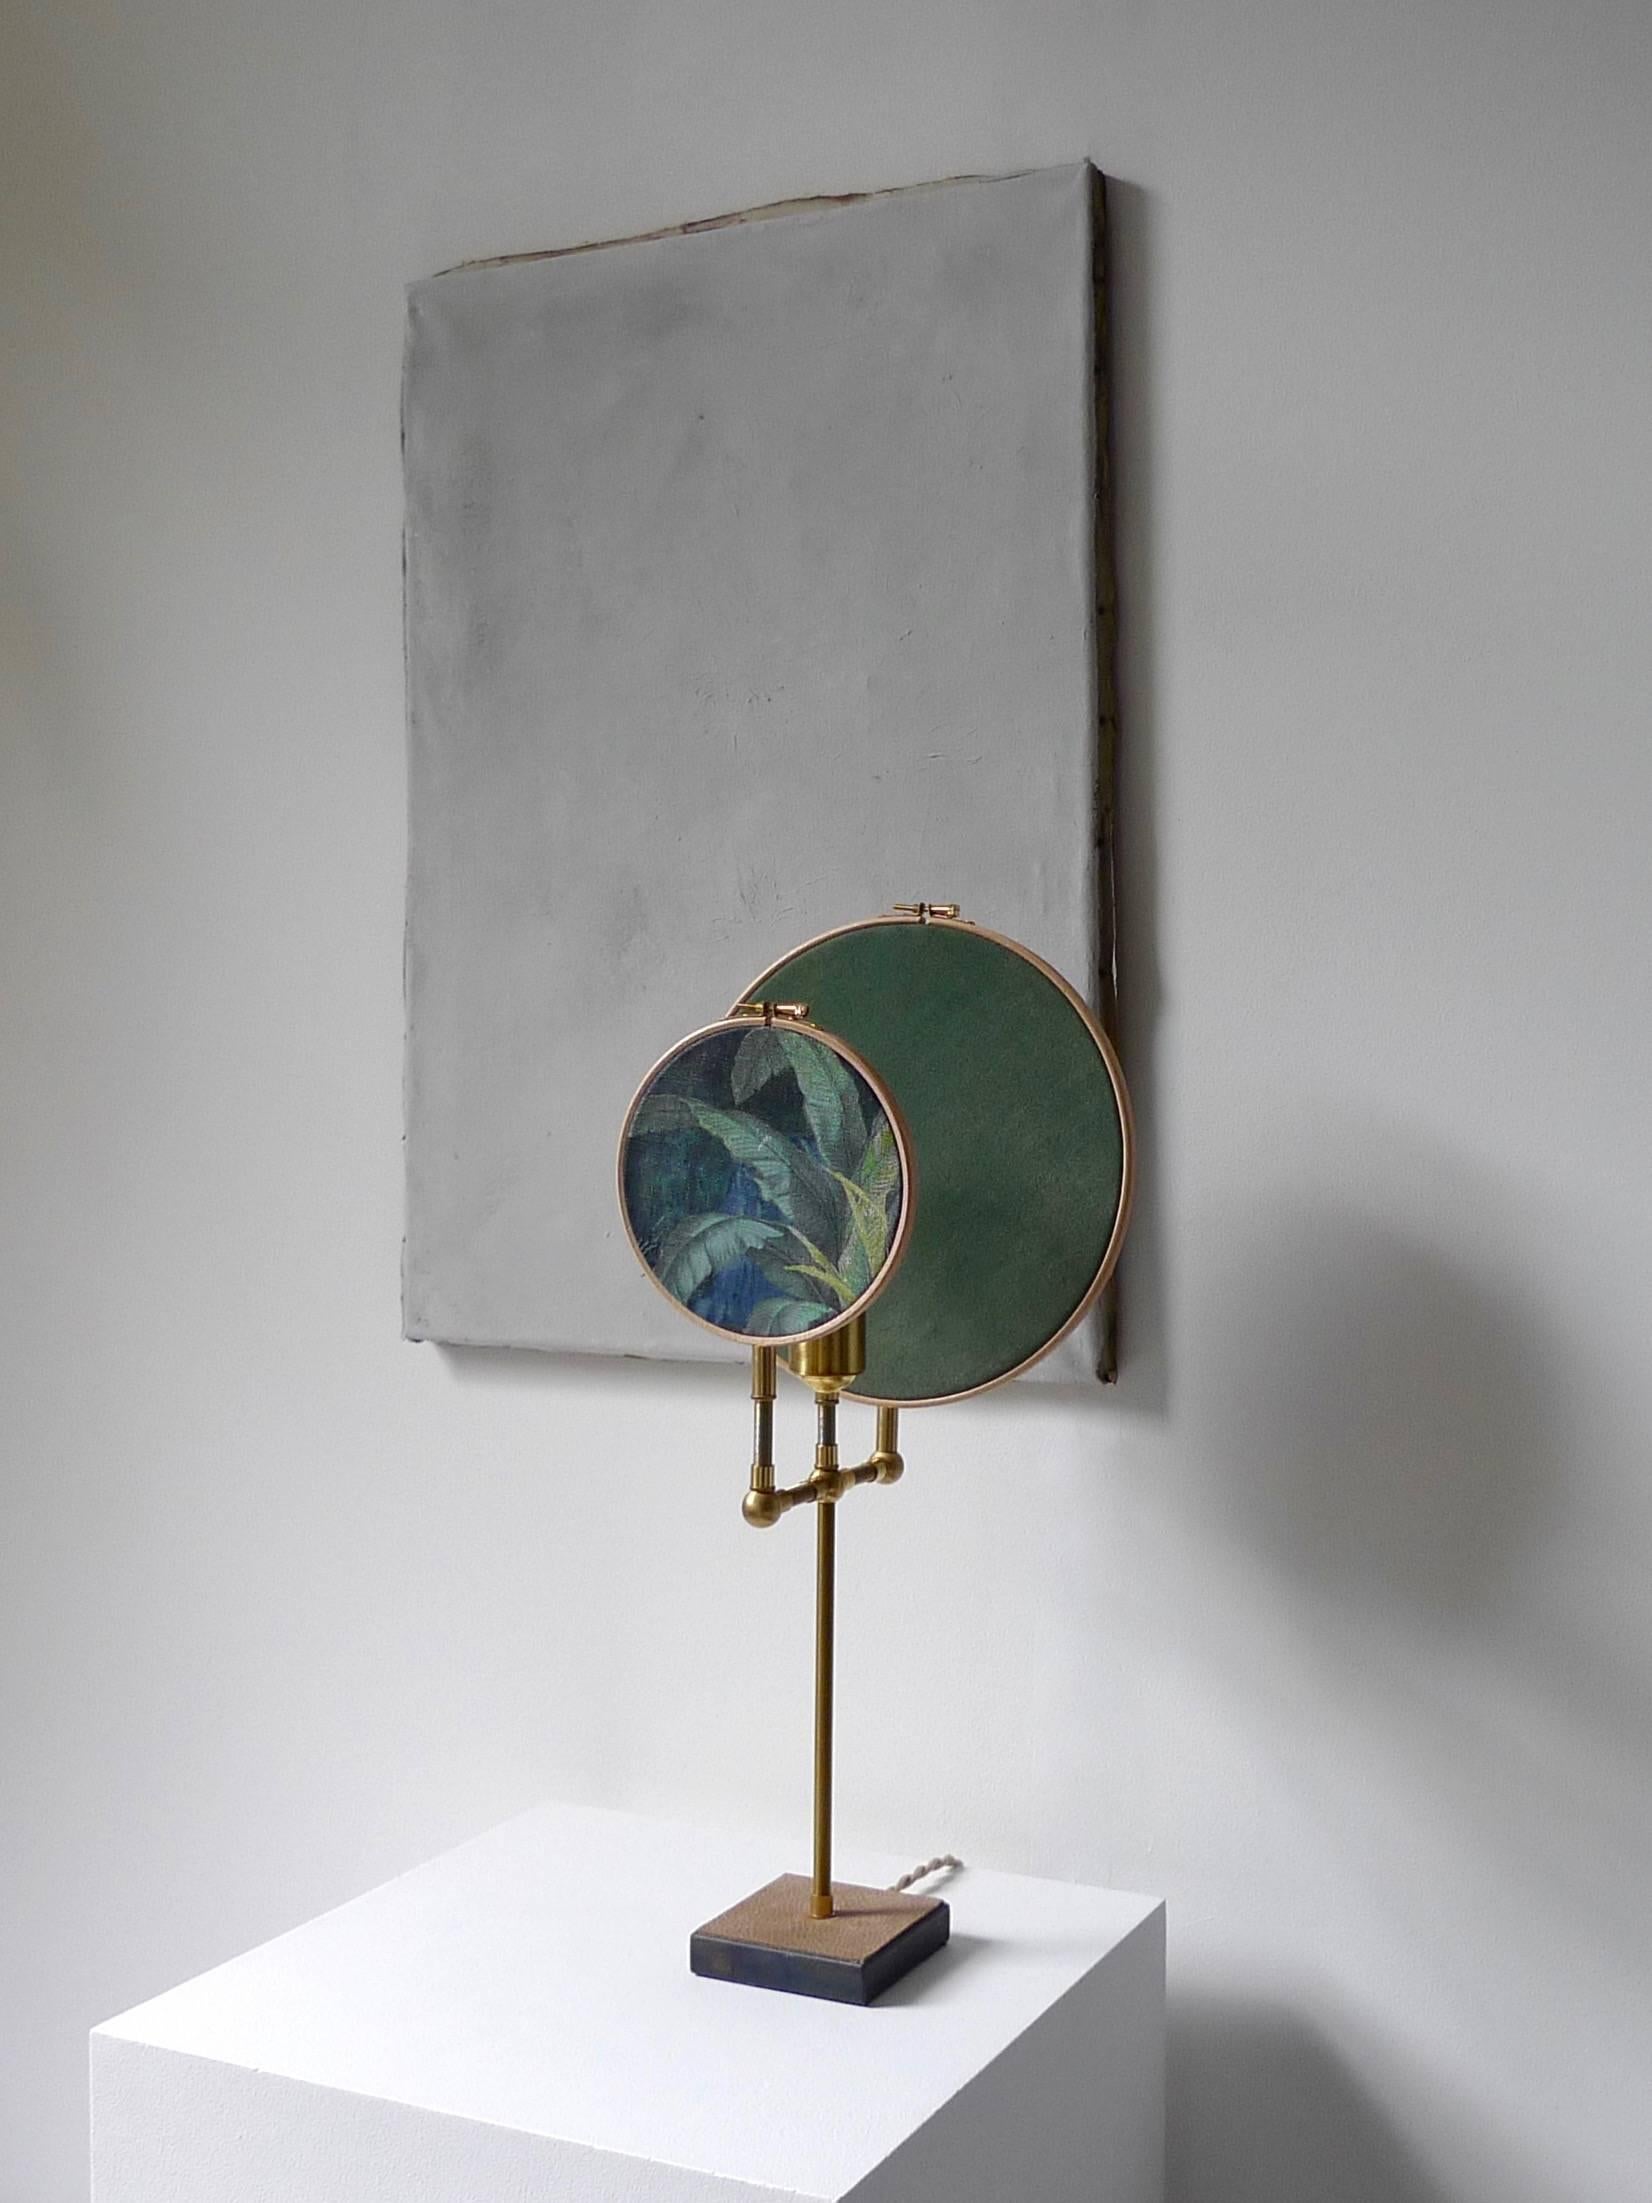 Light object, floor lamp, circle blue grey
Handmade in brass, leather, wood, hand printed and painted linen.
A dimmer is inlaid with leather
Dimensions: H 55 x W 27 x D 16 cm
The design artwork is meticulously handcrafted in a limited series,